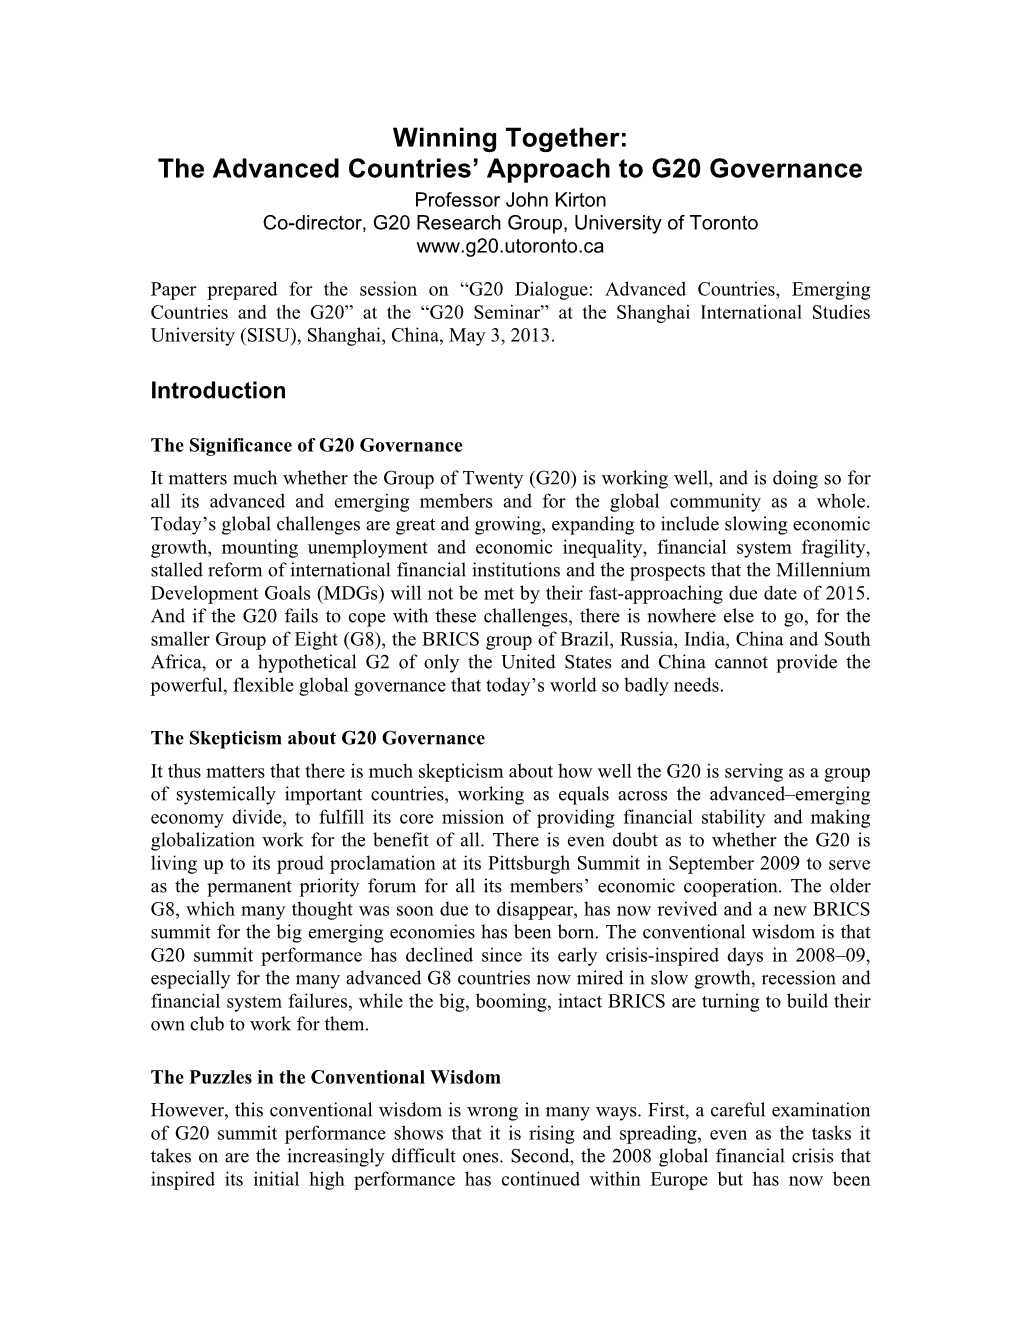 Winning Together: the Advanced Countries' Approach to G20 Governance